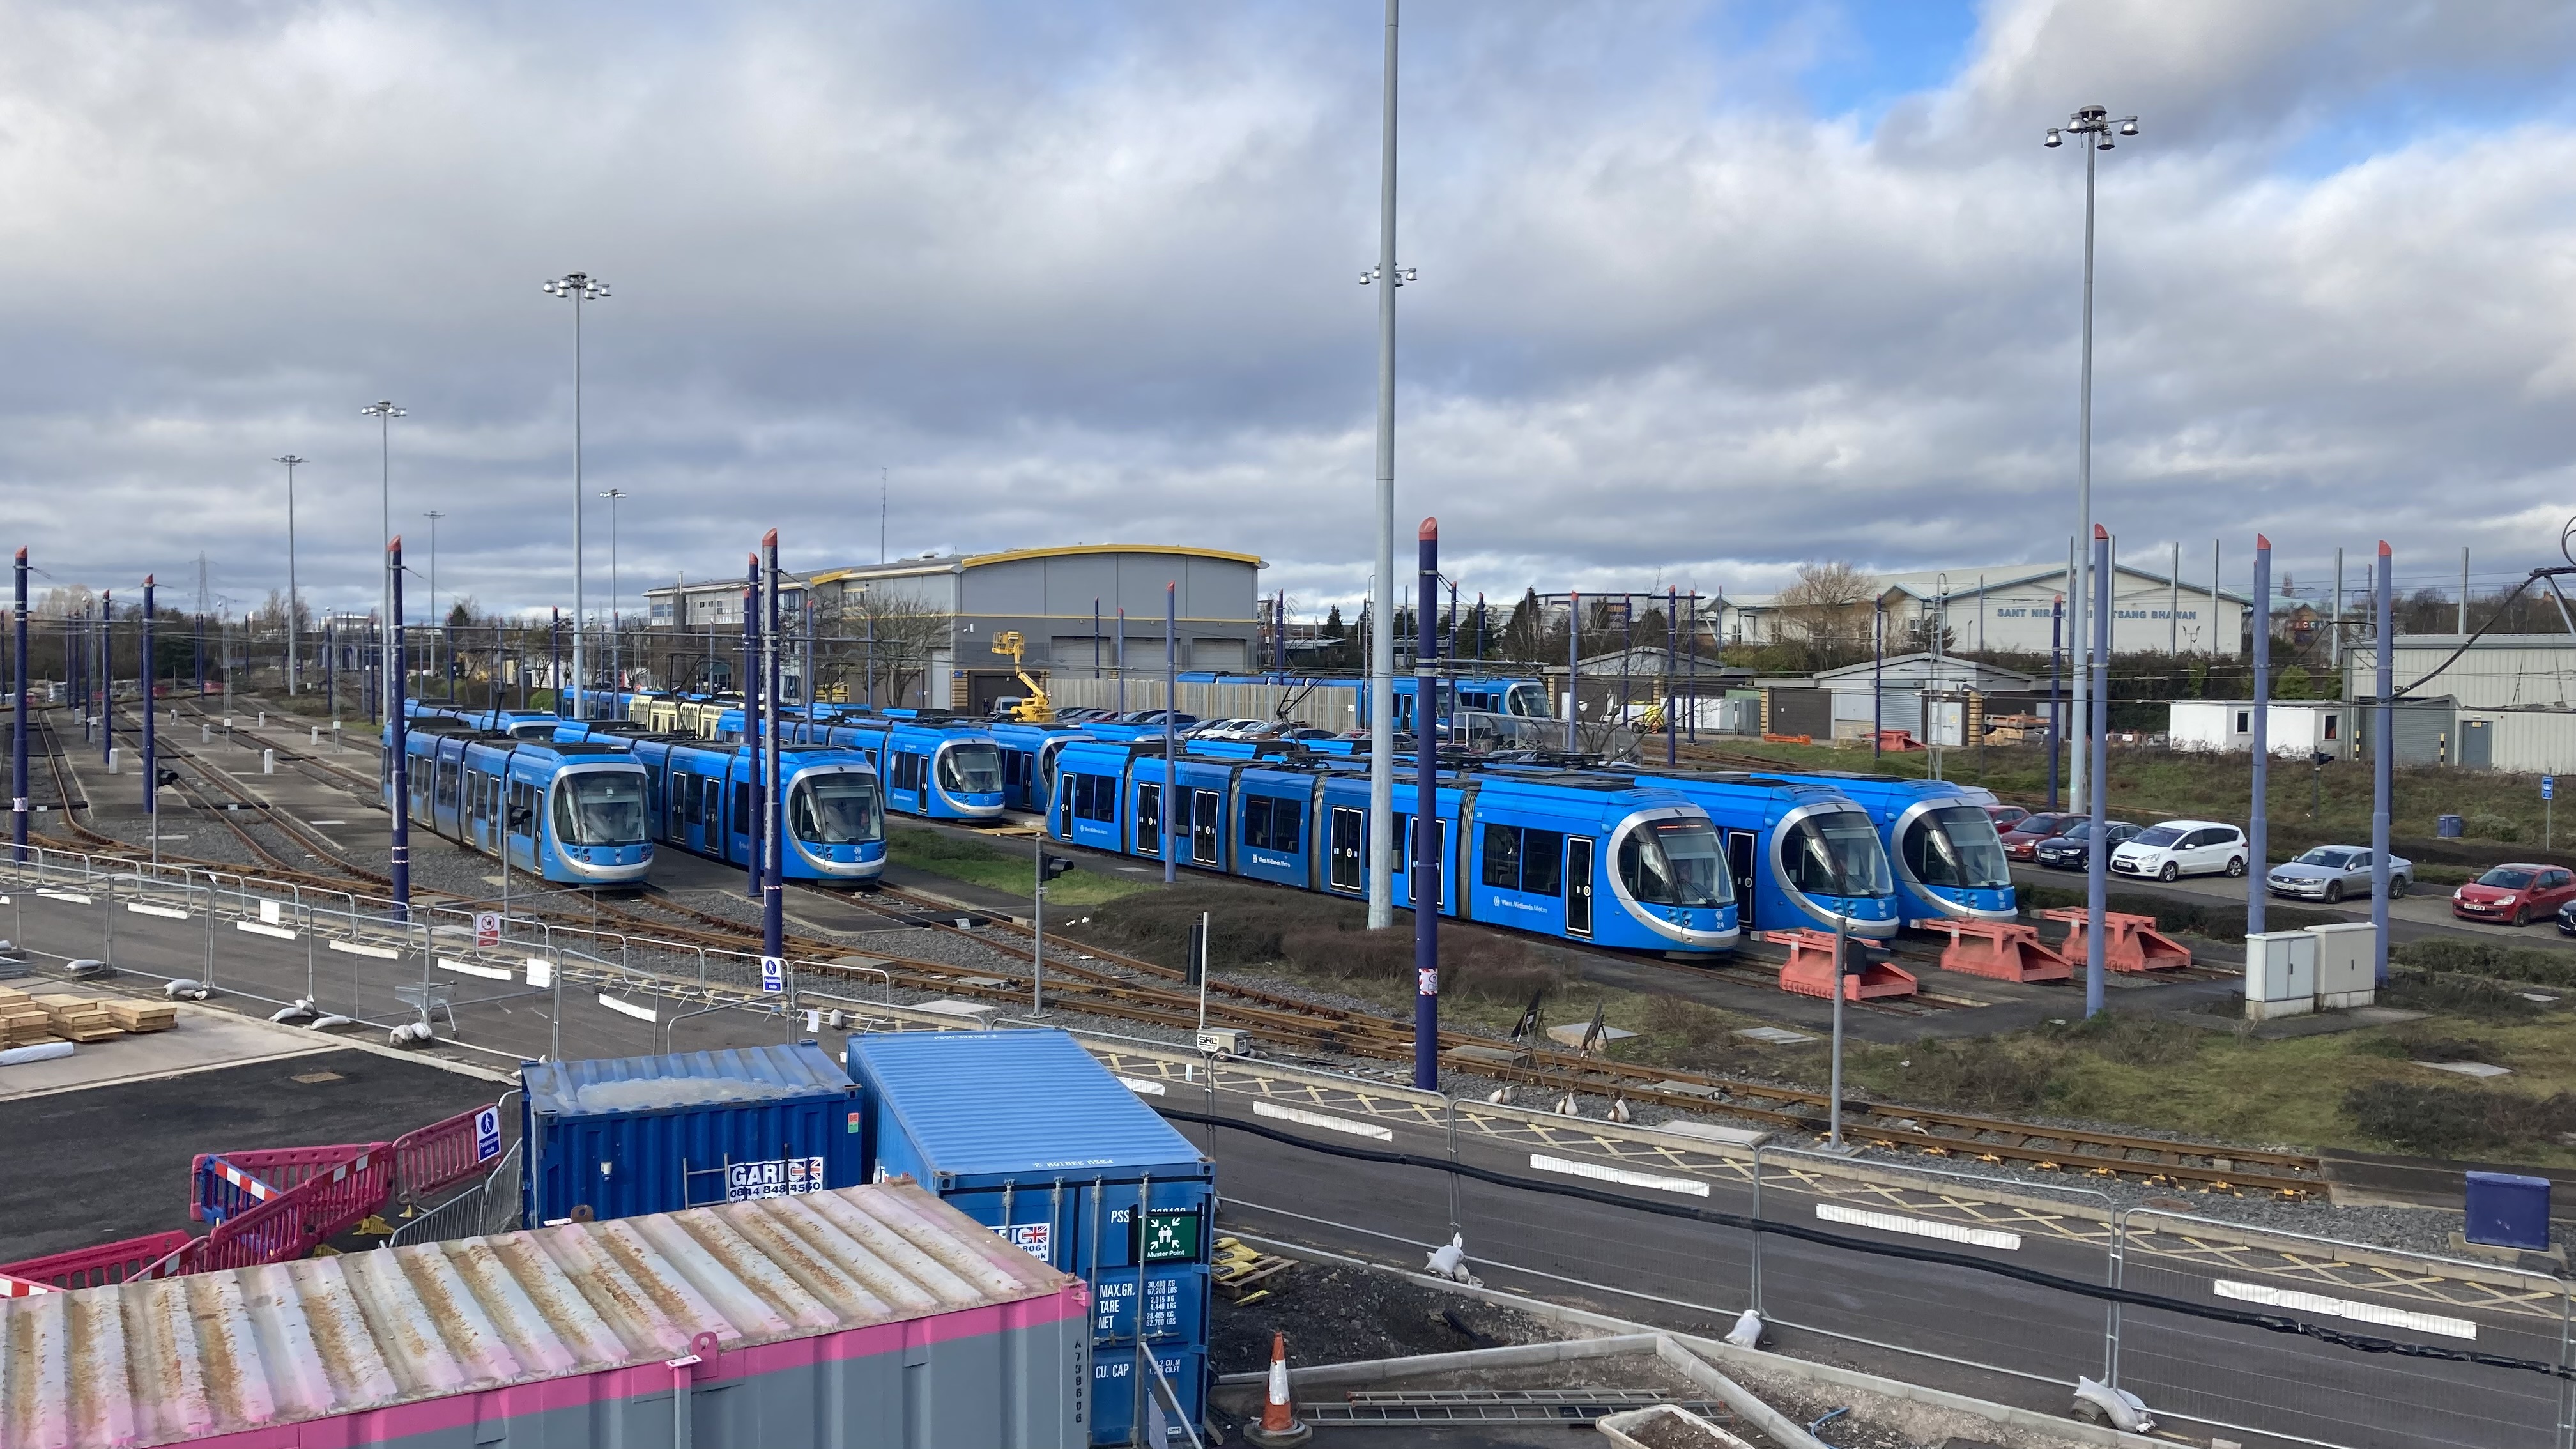 Overlooking depot where more than ten bright blue West Midlands Metro trams are parked up